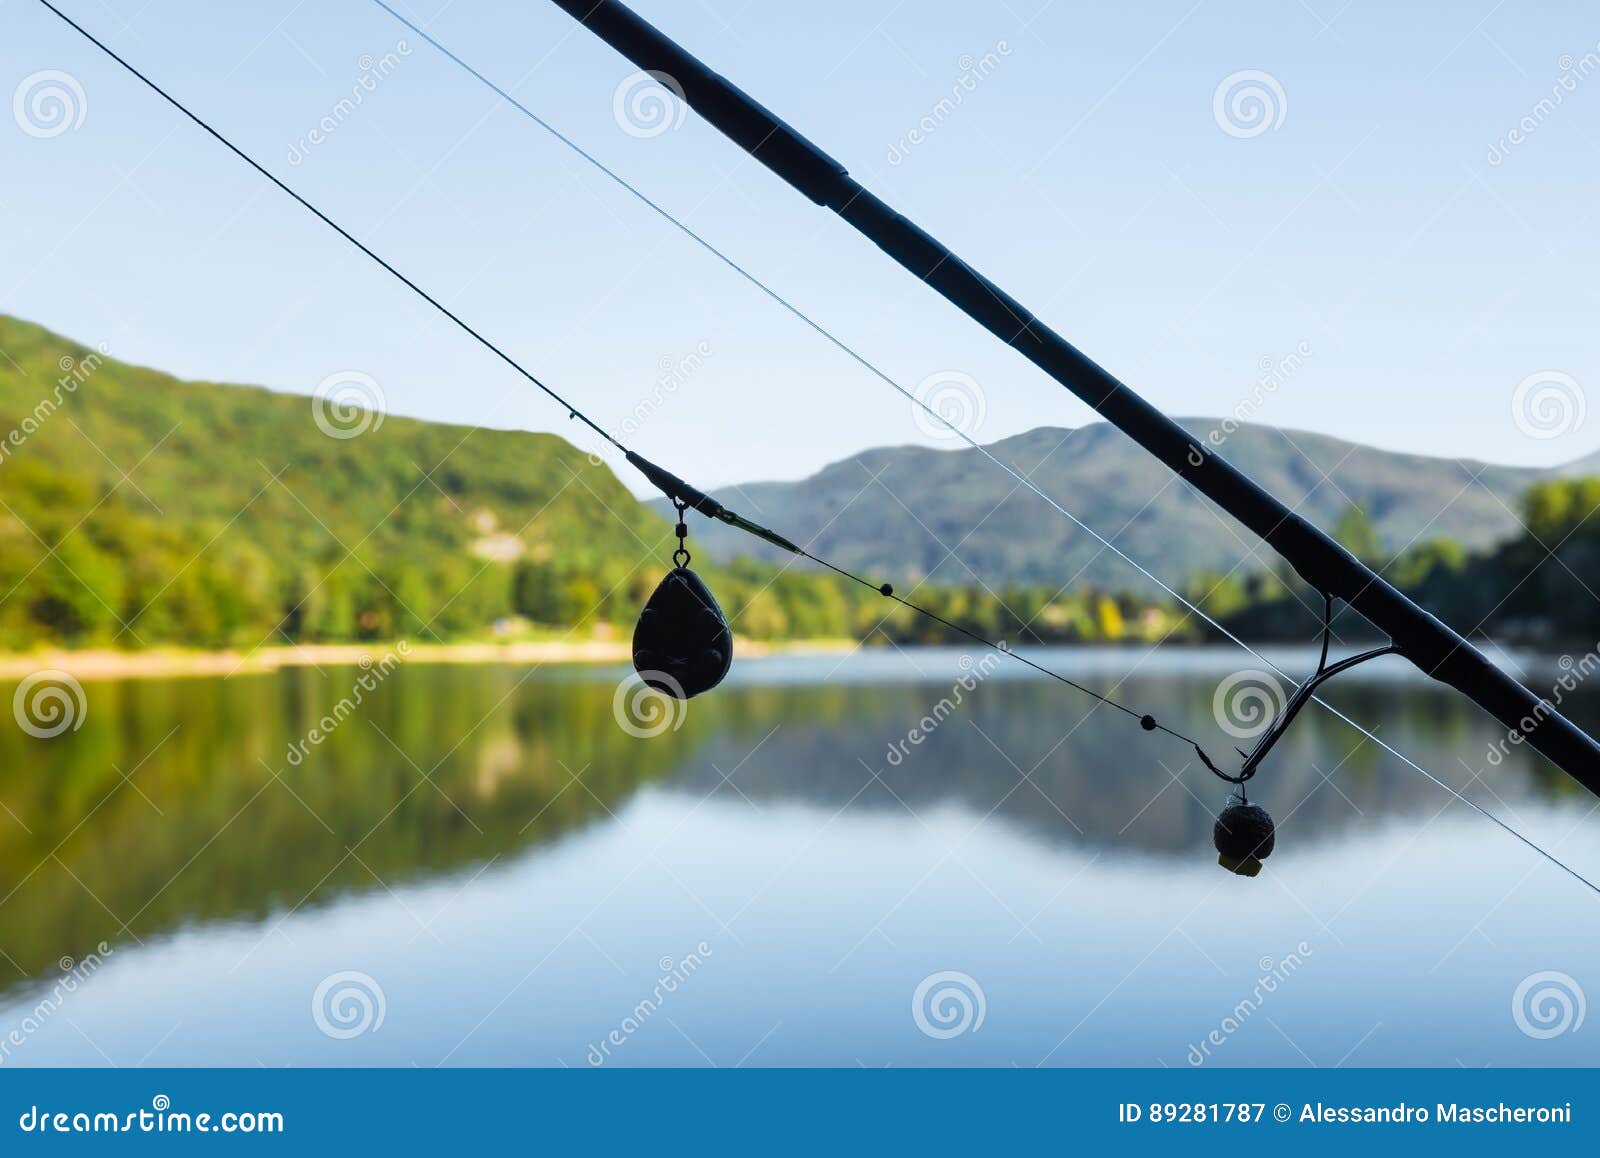 Fishing Adventures, Carp Fishing. Profile of Gear for Carpfishing, Close Up  of a Hair Rig Stock Image - Image of angler, outdoors: 89281787